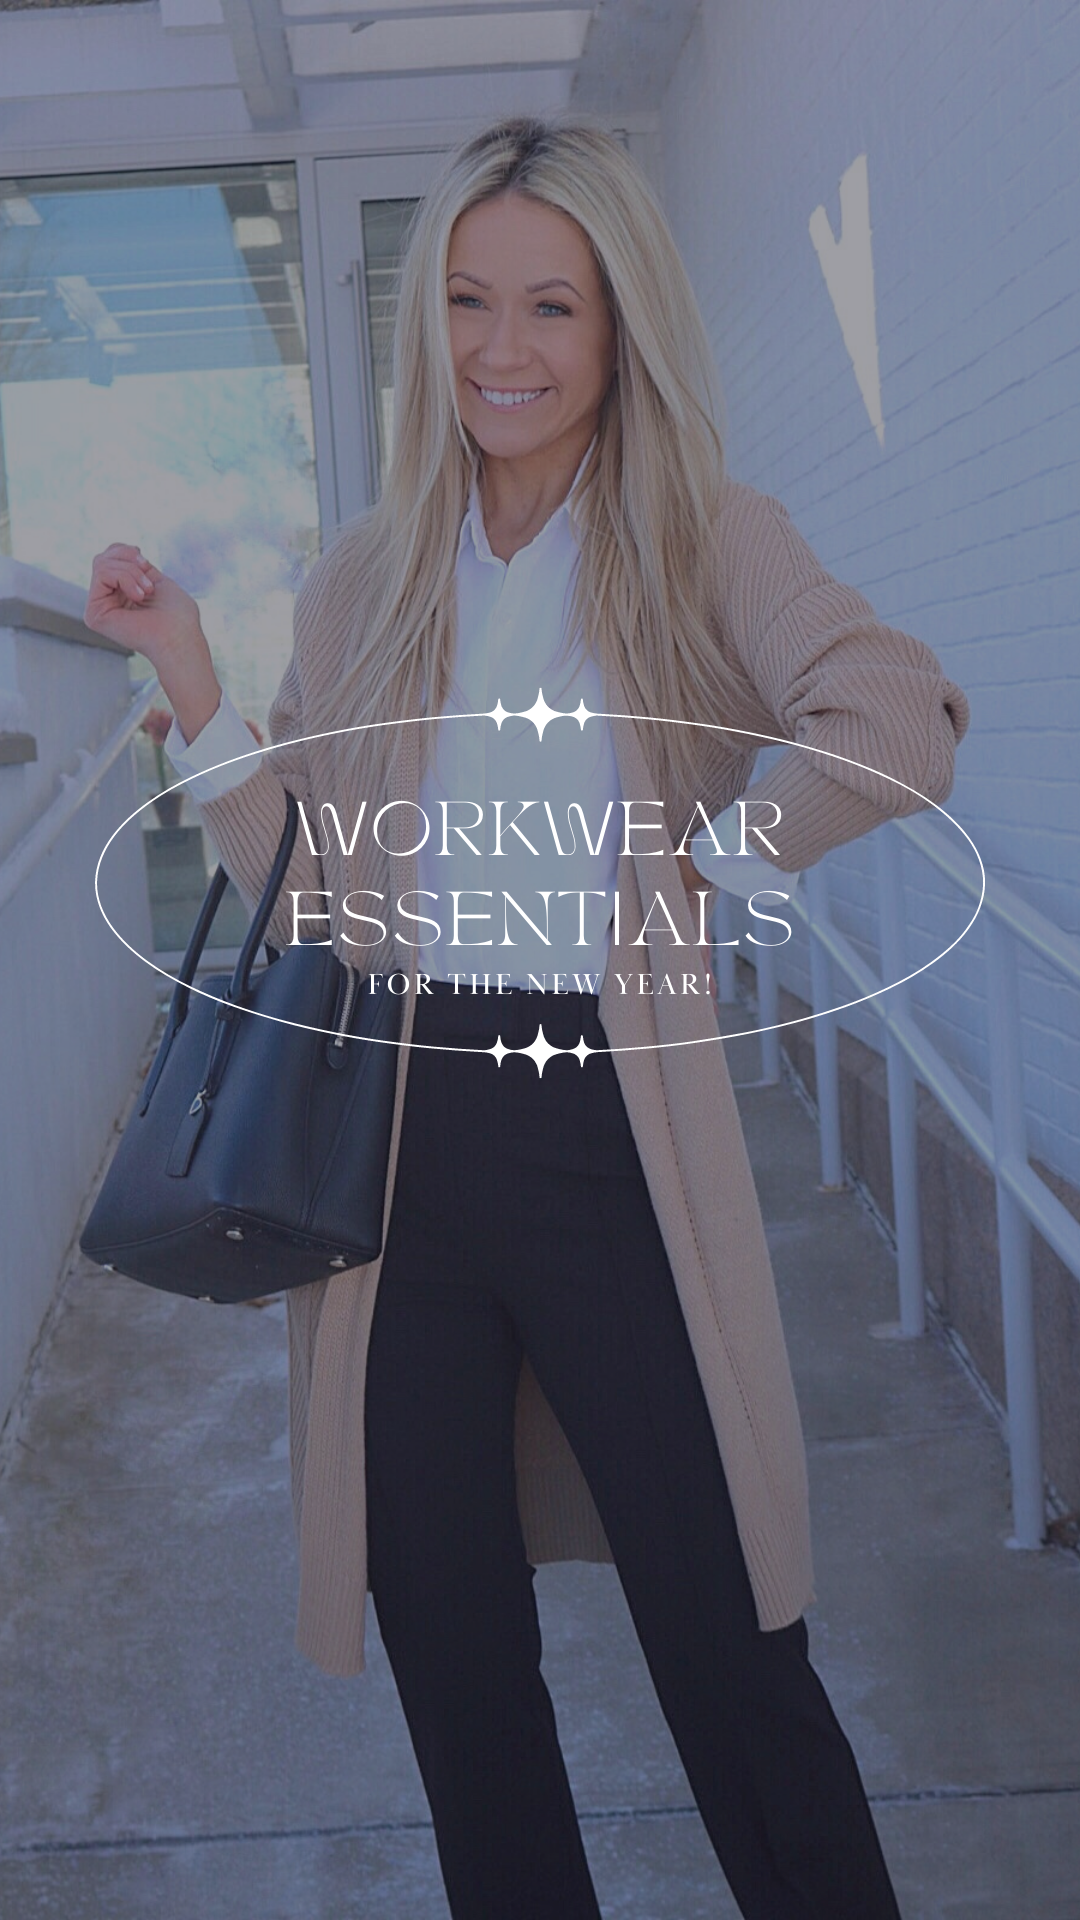 Workwear Essentials for the New Year!